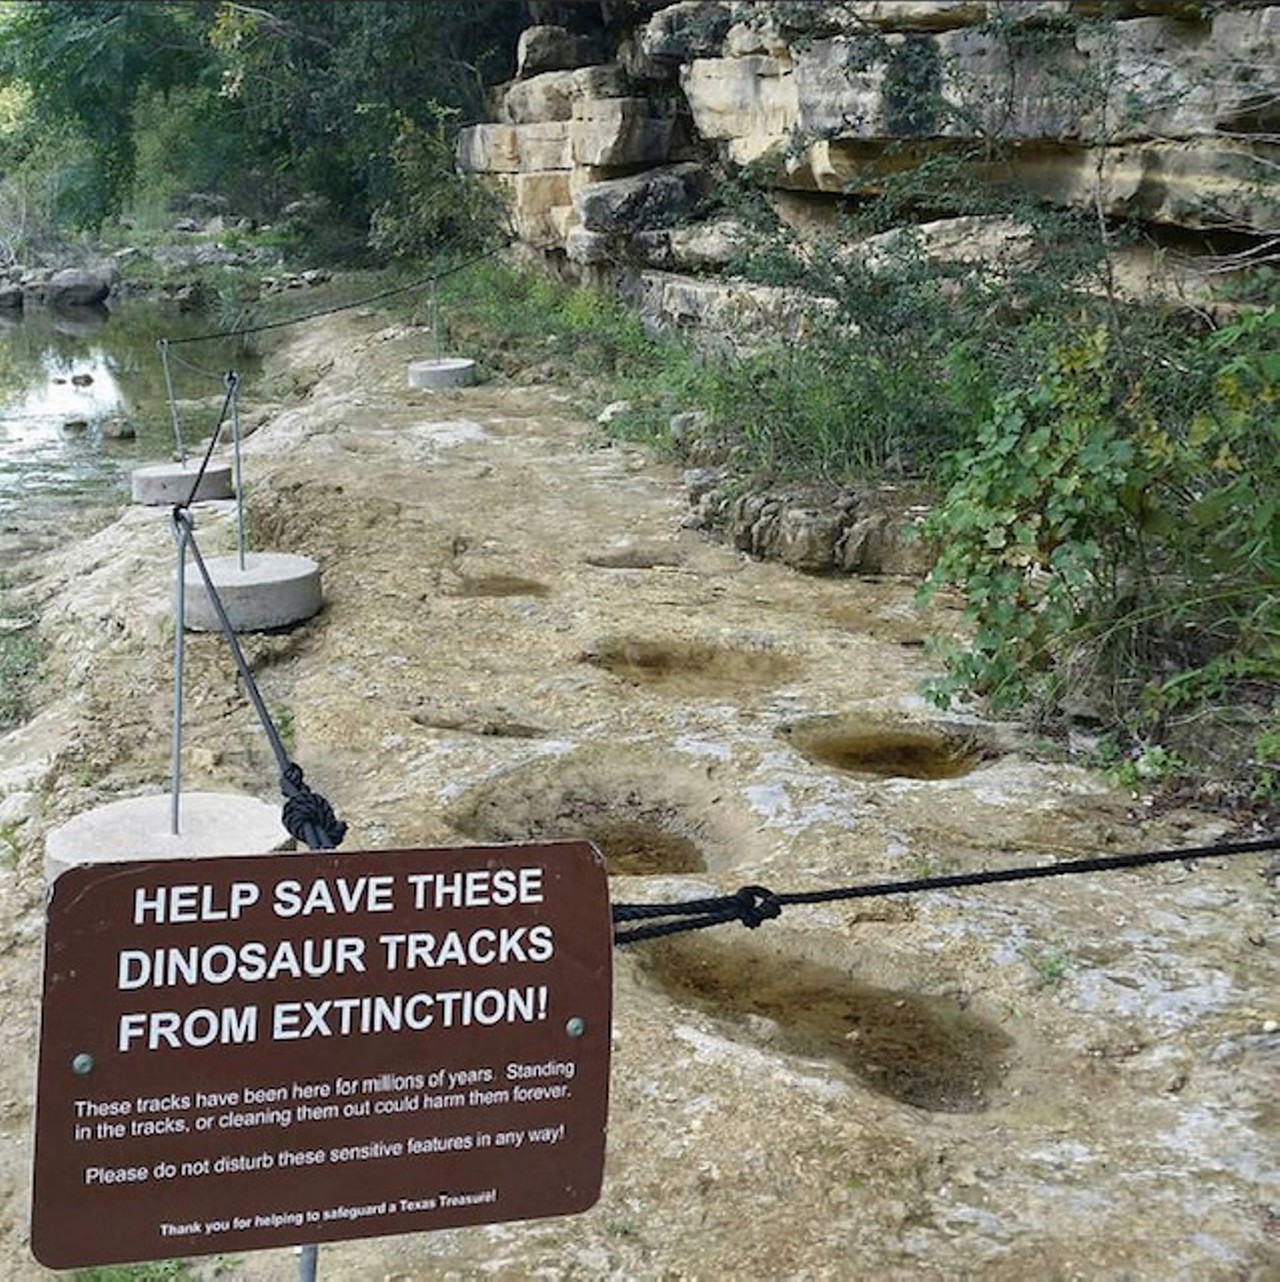 Hike to the dinosaur tracks at Government Canyon12861 Galm Rd., (210) 688-9055, tpwd.texas.gov Home to South Texas’ only known dinosaur tracks on public land, Government Canyon State Natural Area’s Joe Johnston Route was marked by prehistoric creatures from about 110 million years ago when San Antonio was the shoreline of the Gulf of Mexico. The 5-mile round trip takes hikers on a rugged trail to Marker #19 where two types of dinosaur tracks can be found, the three-tip theropod and the rounded sauropod print.       Photo via Instagram / governmentcanyon